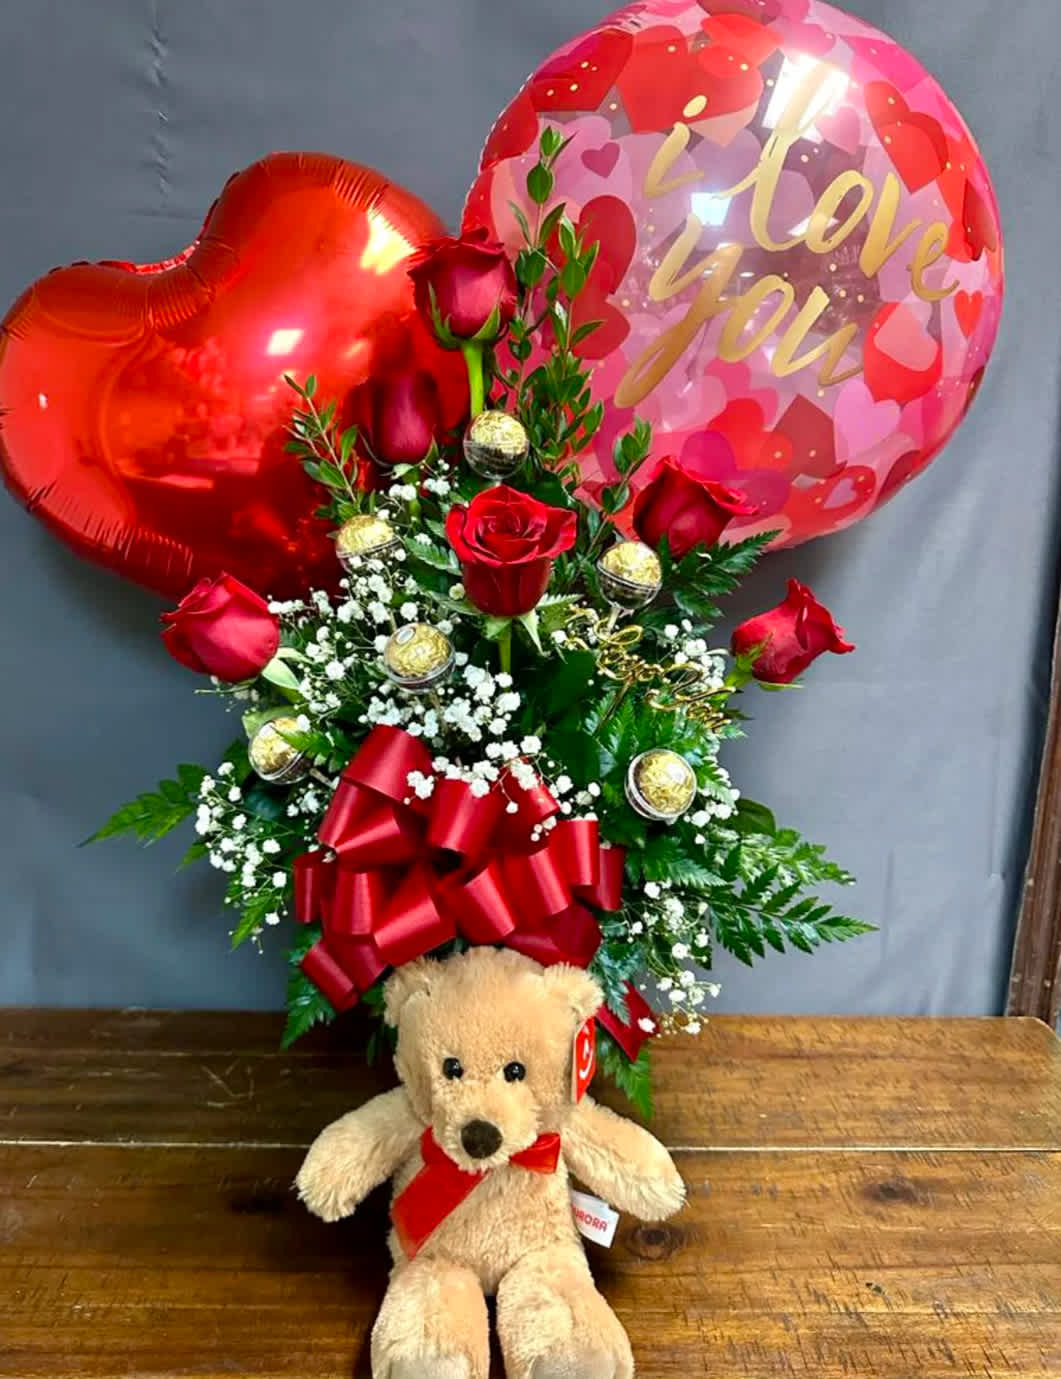 Half Dozen Red Rose Combo - Half Dozen Red Rose Arrangement in a clear vase. Arrangement comes with a bear plush and 2 mylar balloons and 6 Ferrero Rocher Chocolates.